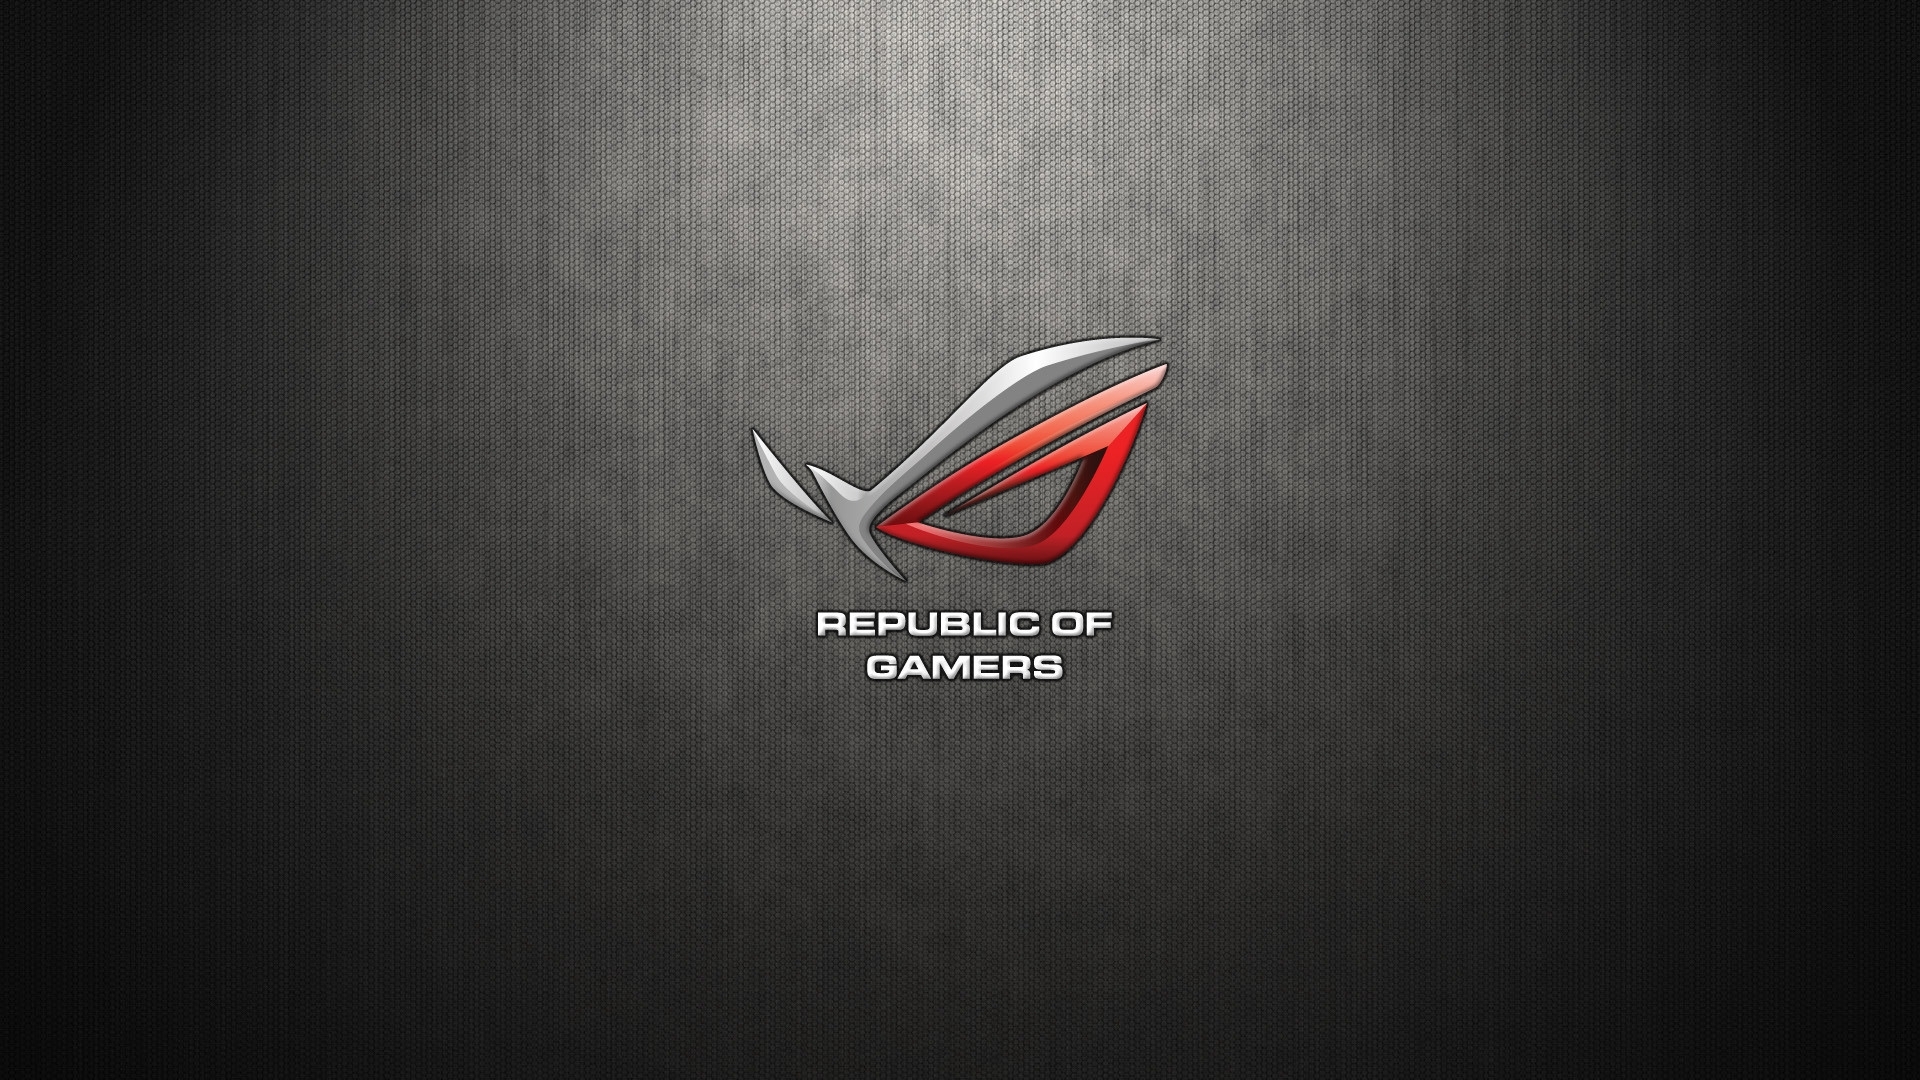 10 Best Asus Rog 1080P Wallpaper FULL HD 1920×1080 For PC Background